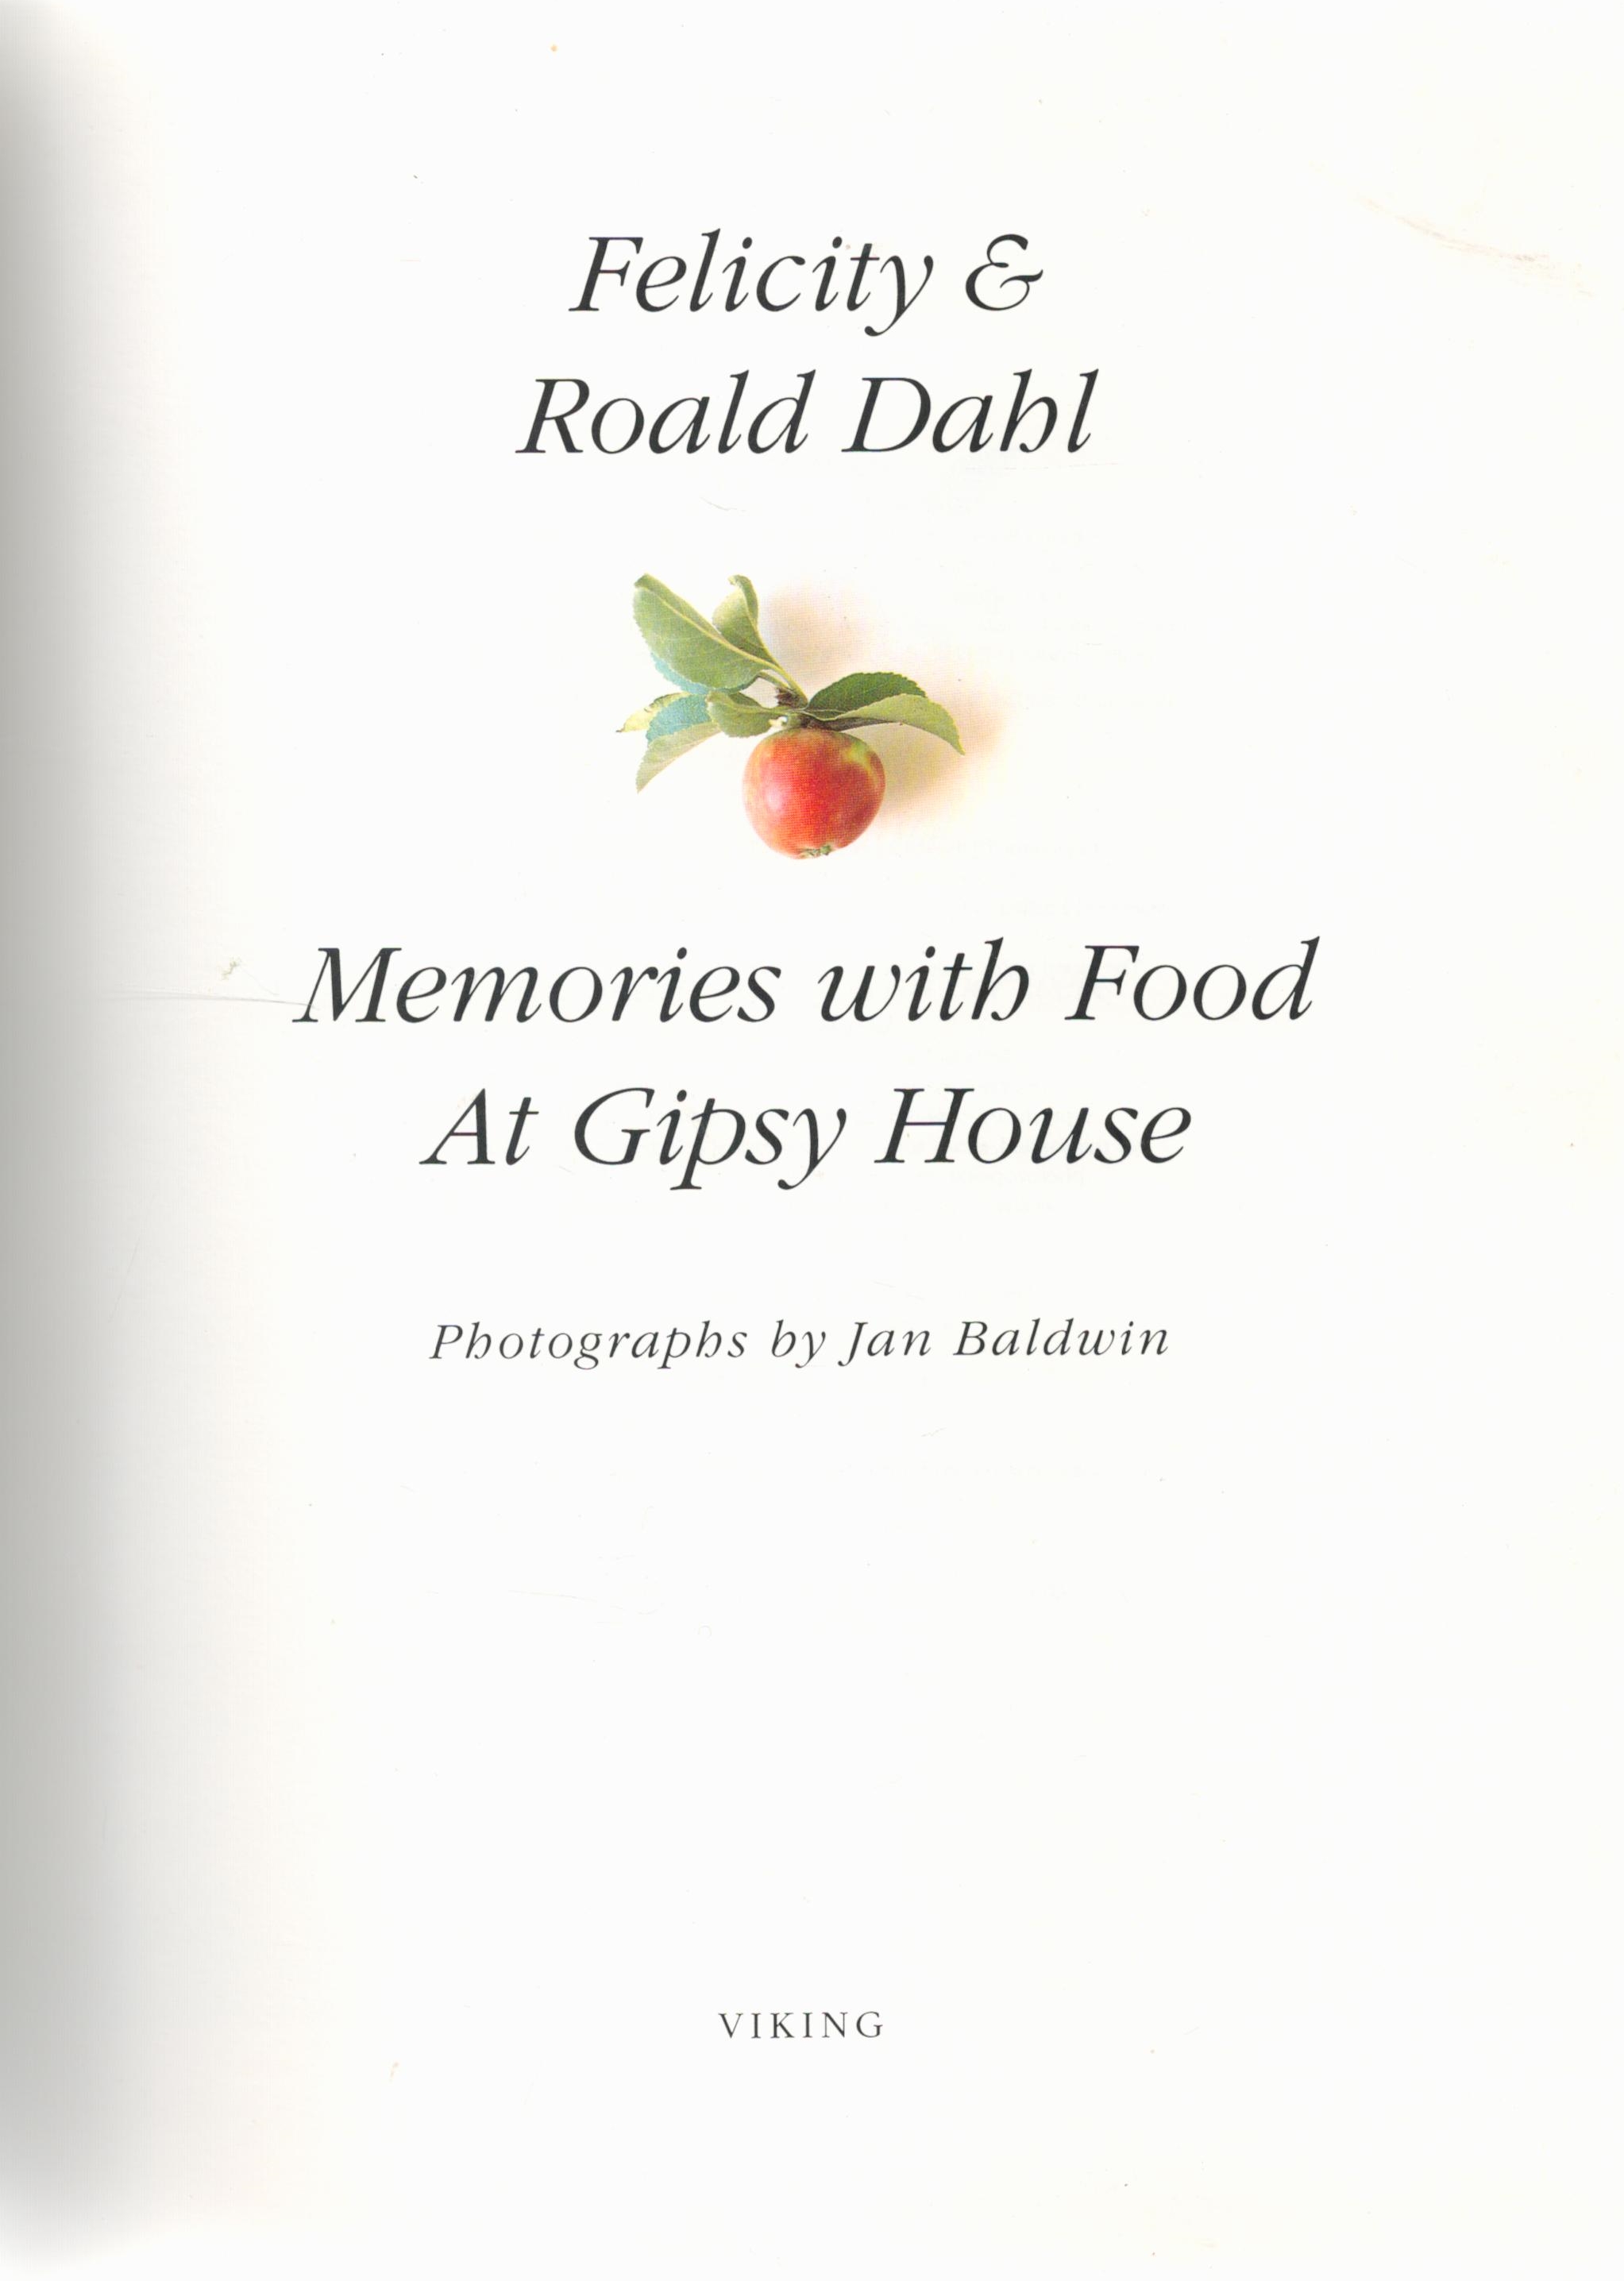 Memories with Food at Gipsy House by Felicity and Roald Dahl Hardback Book 1991 First Edition - Image 2 of 3